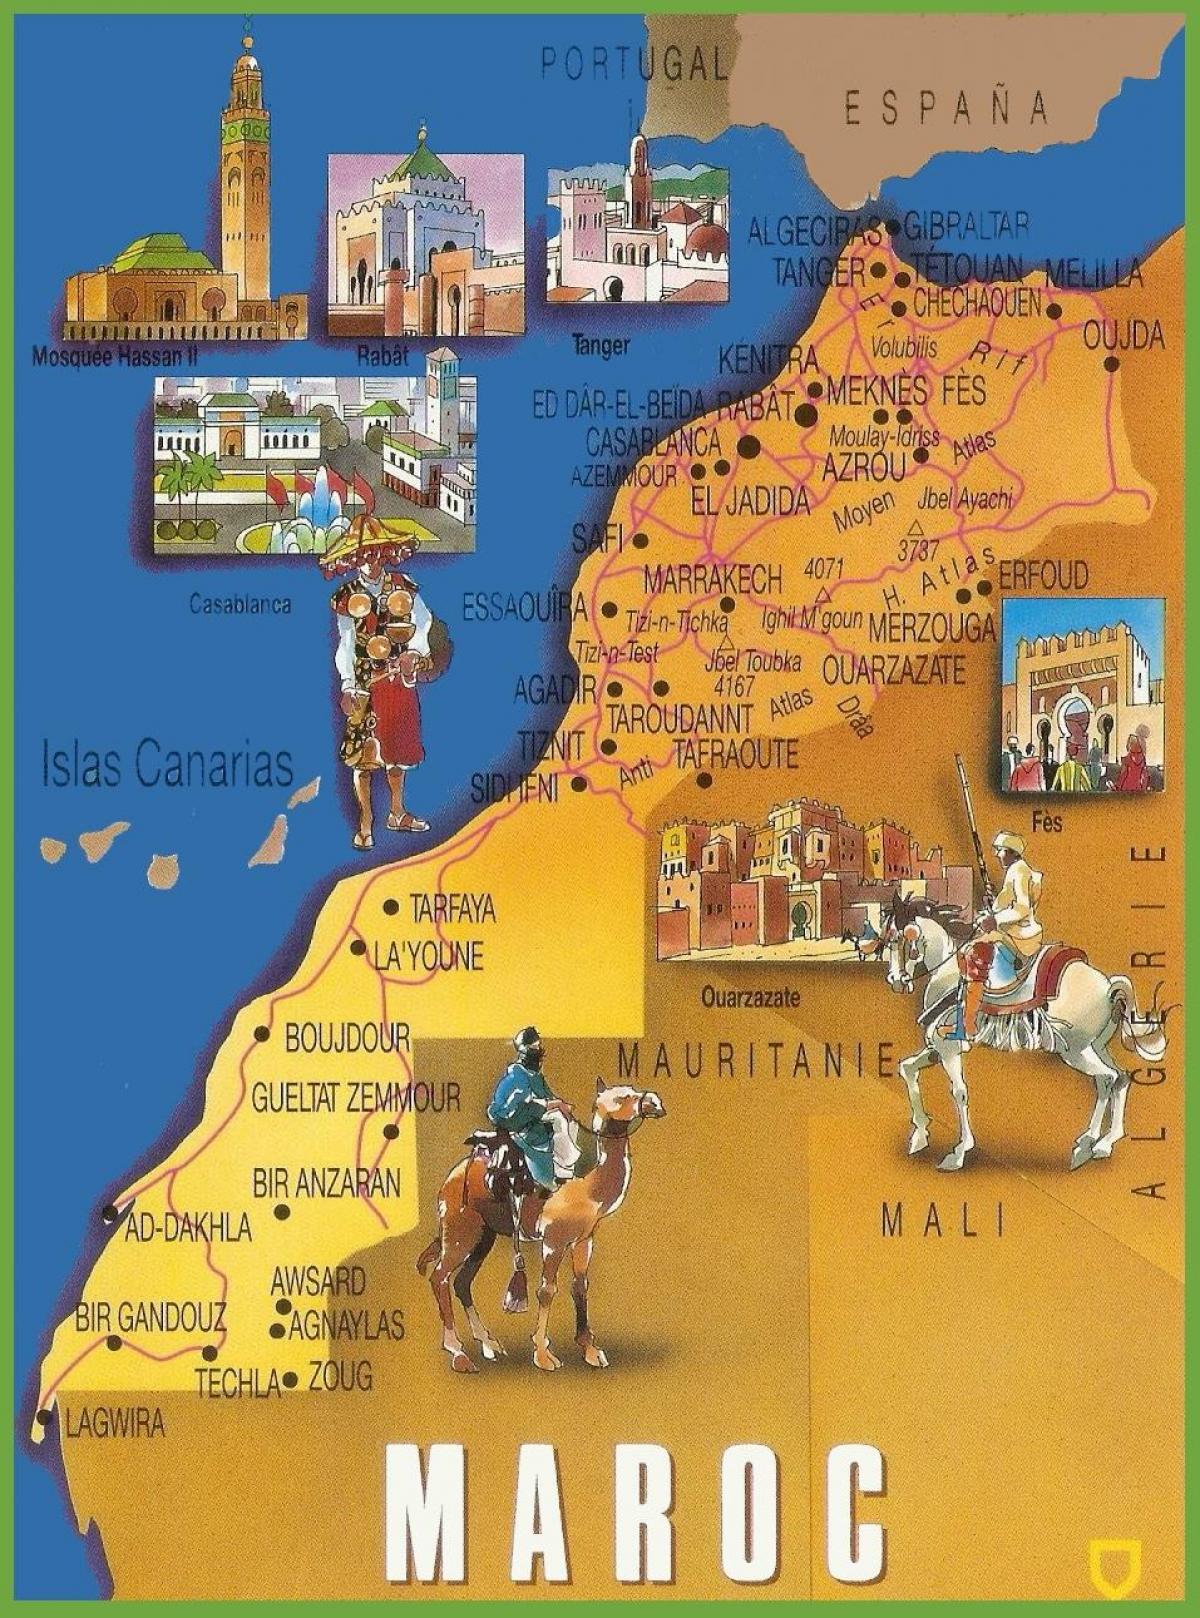 Morocco tourist attractions map